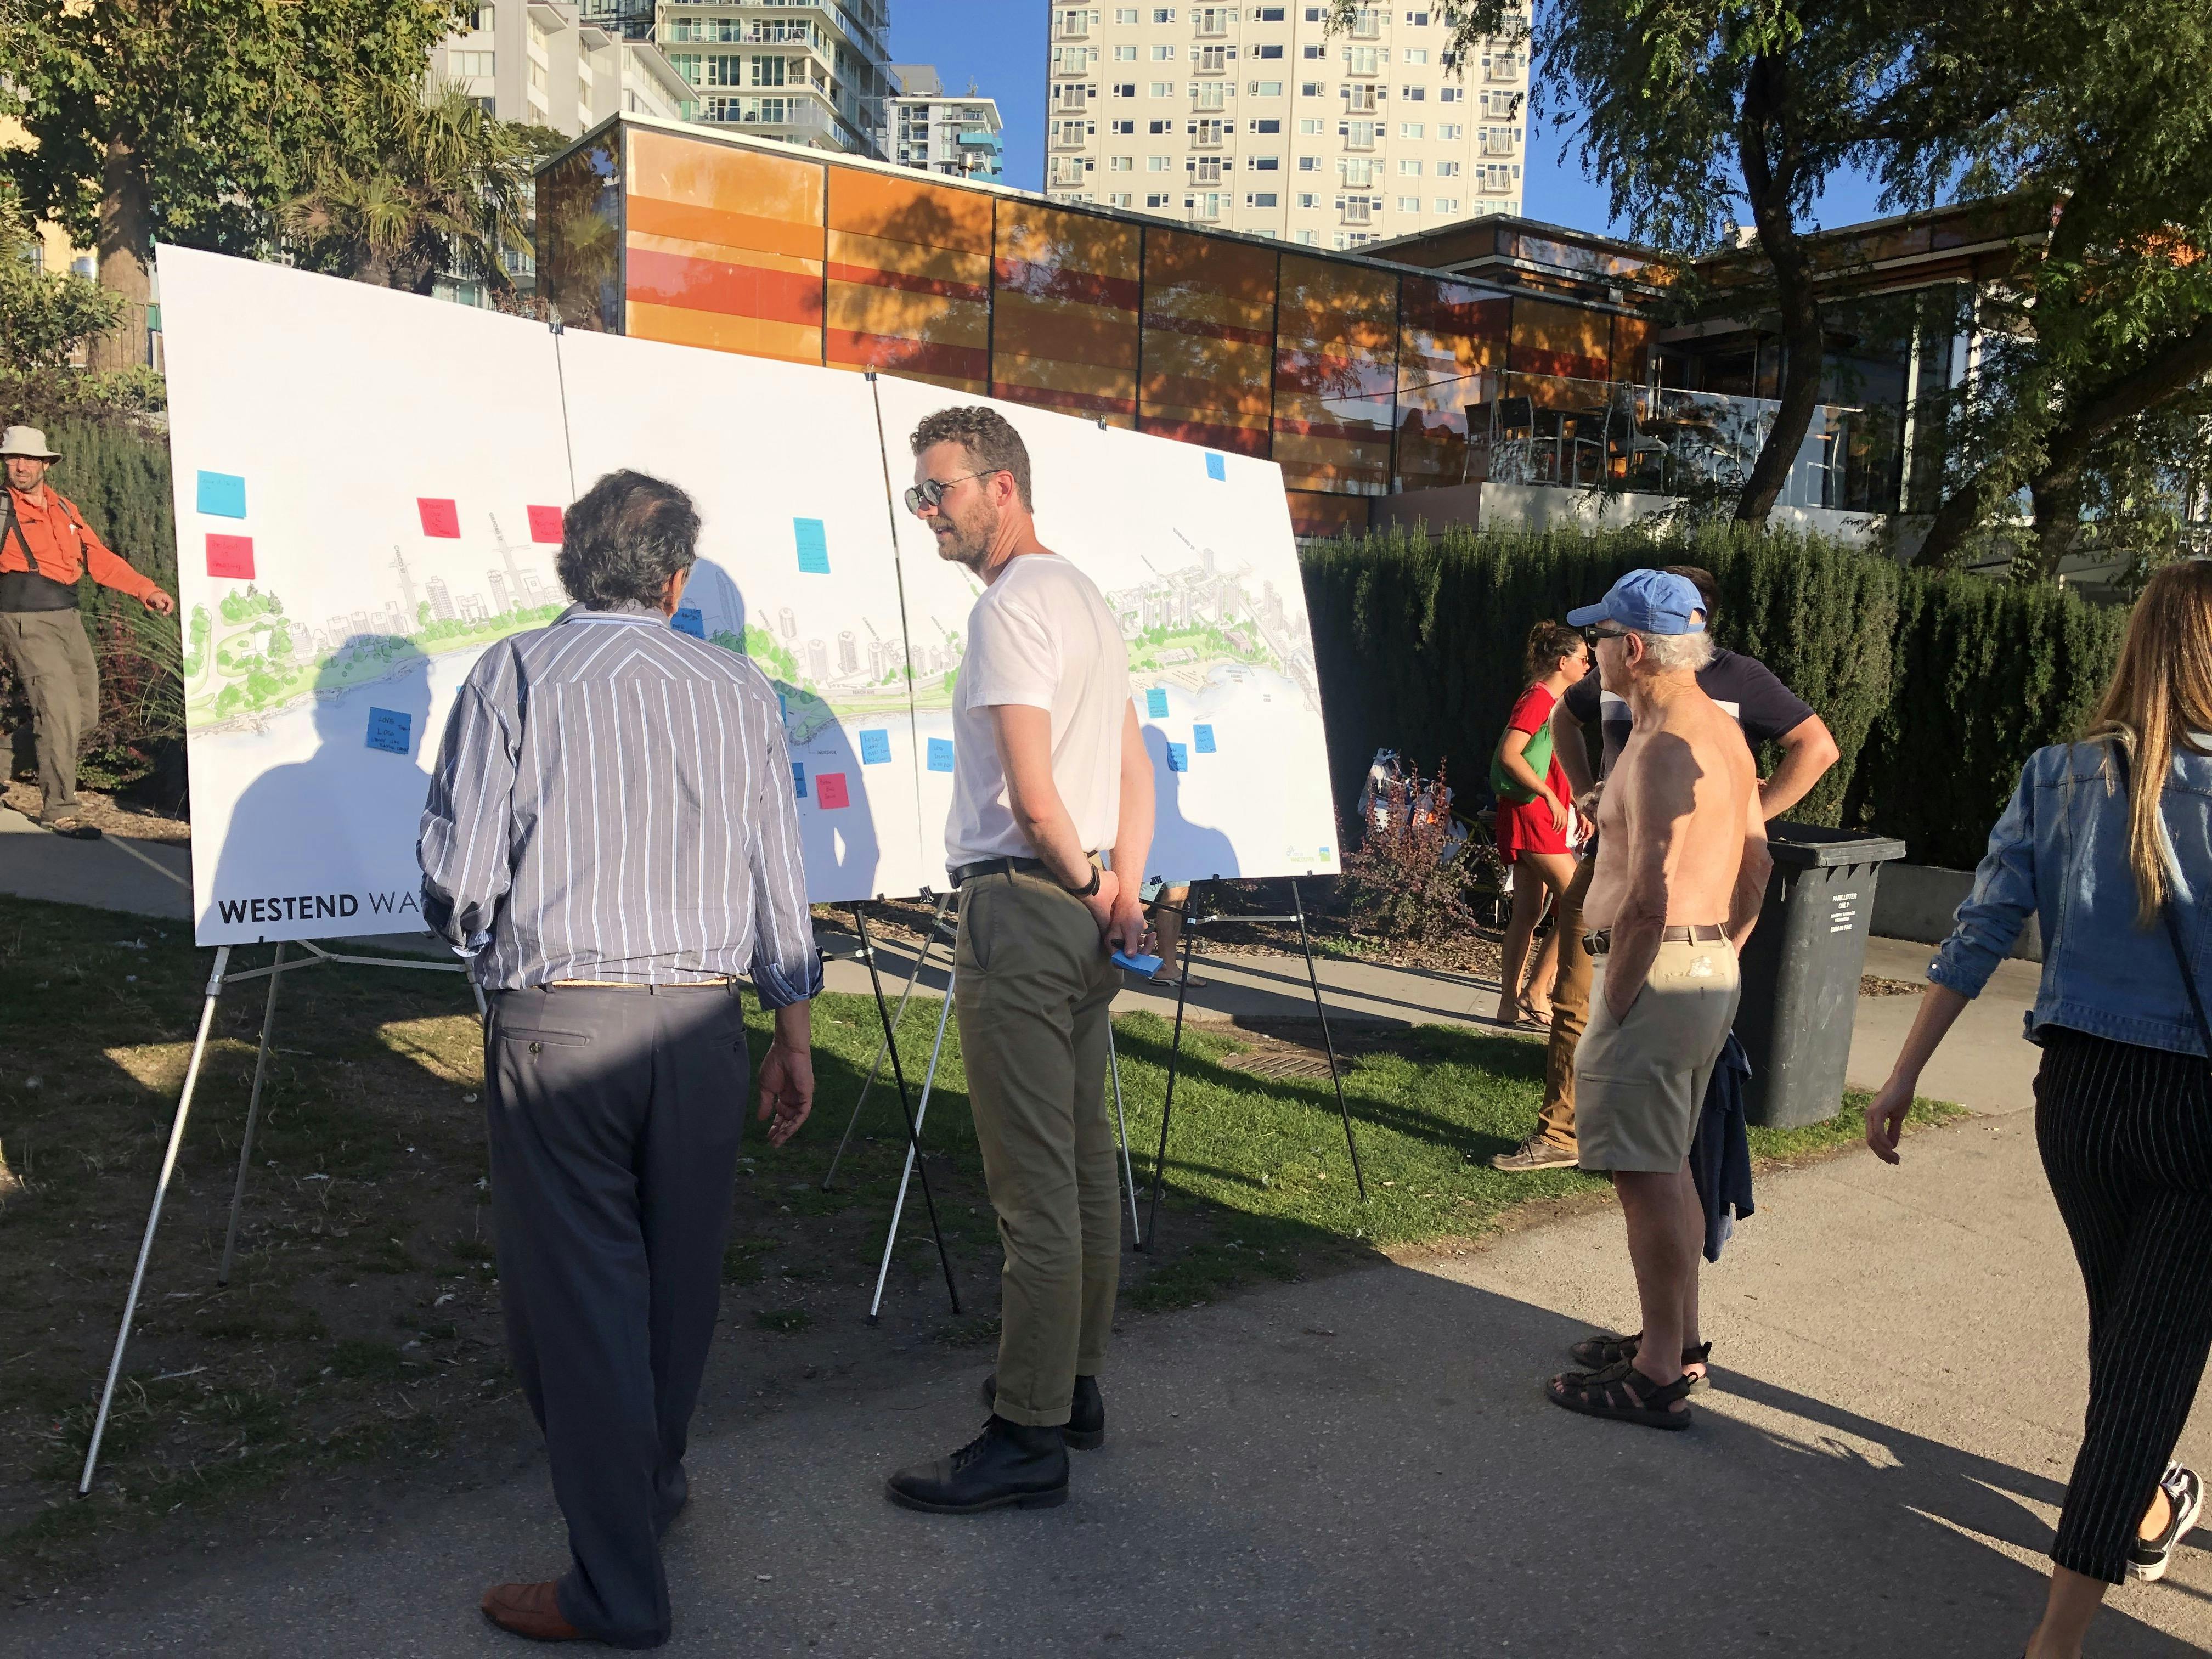 Conversations with People at the English Bay Pop-Up